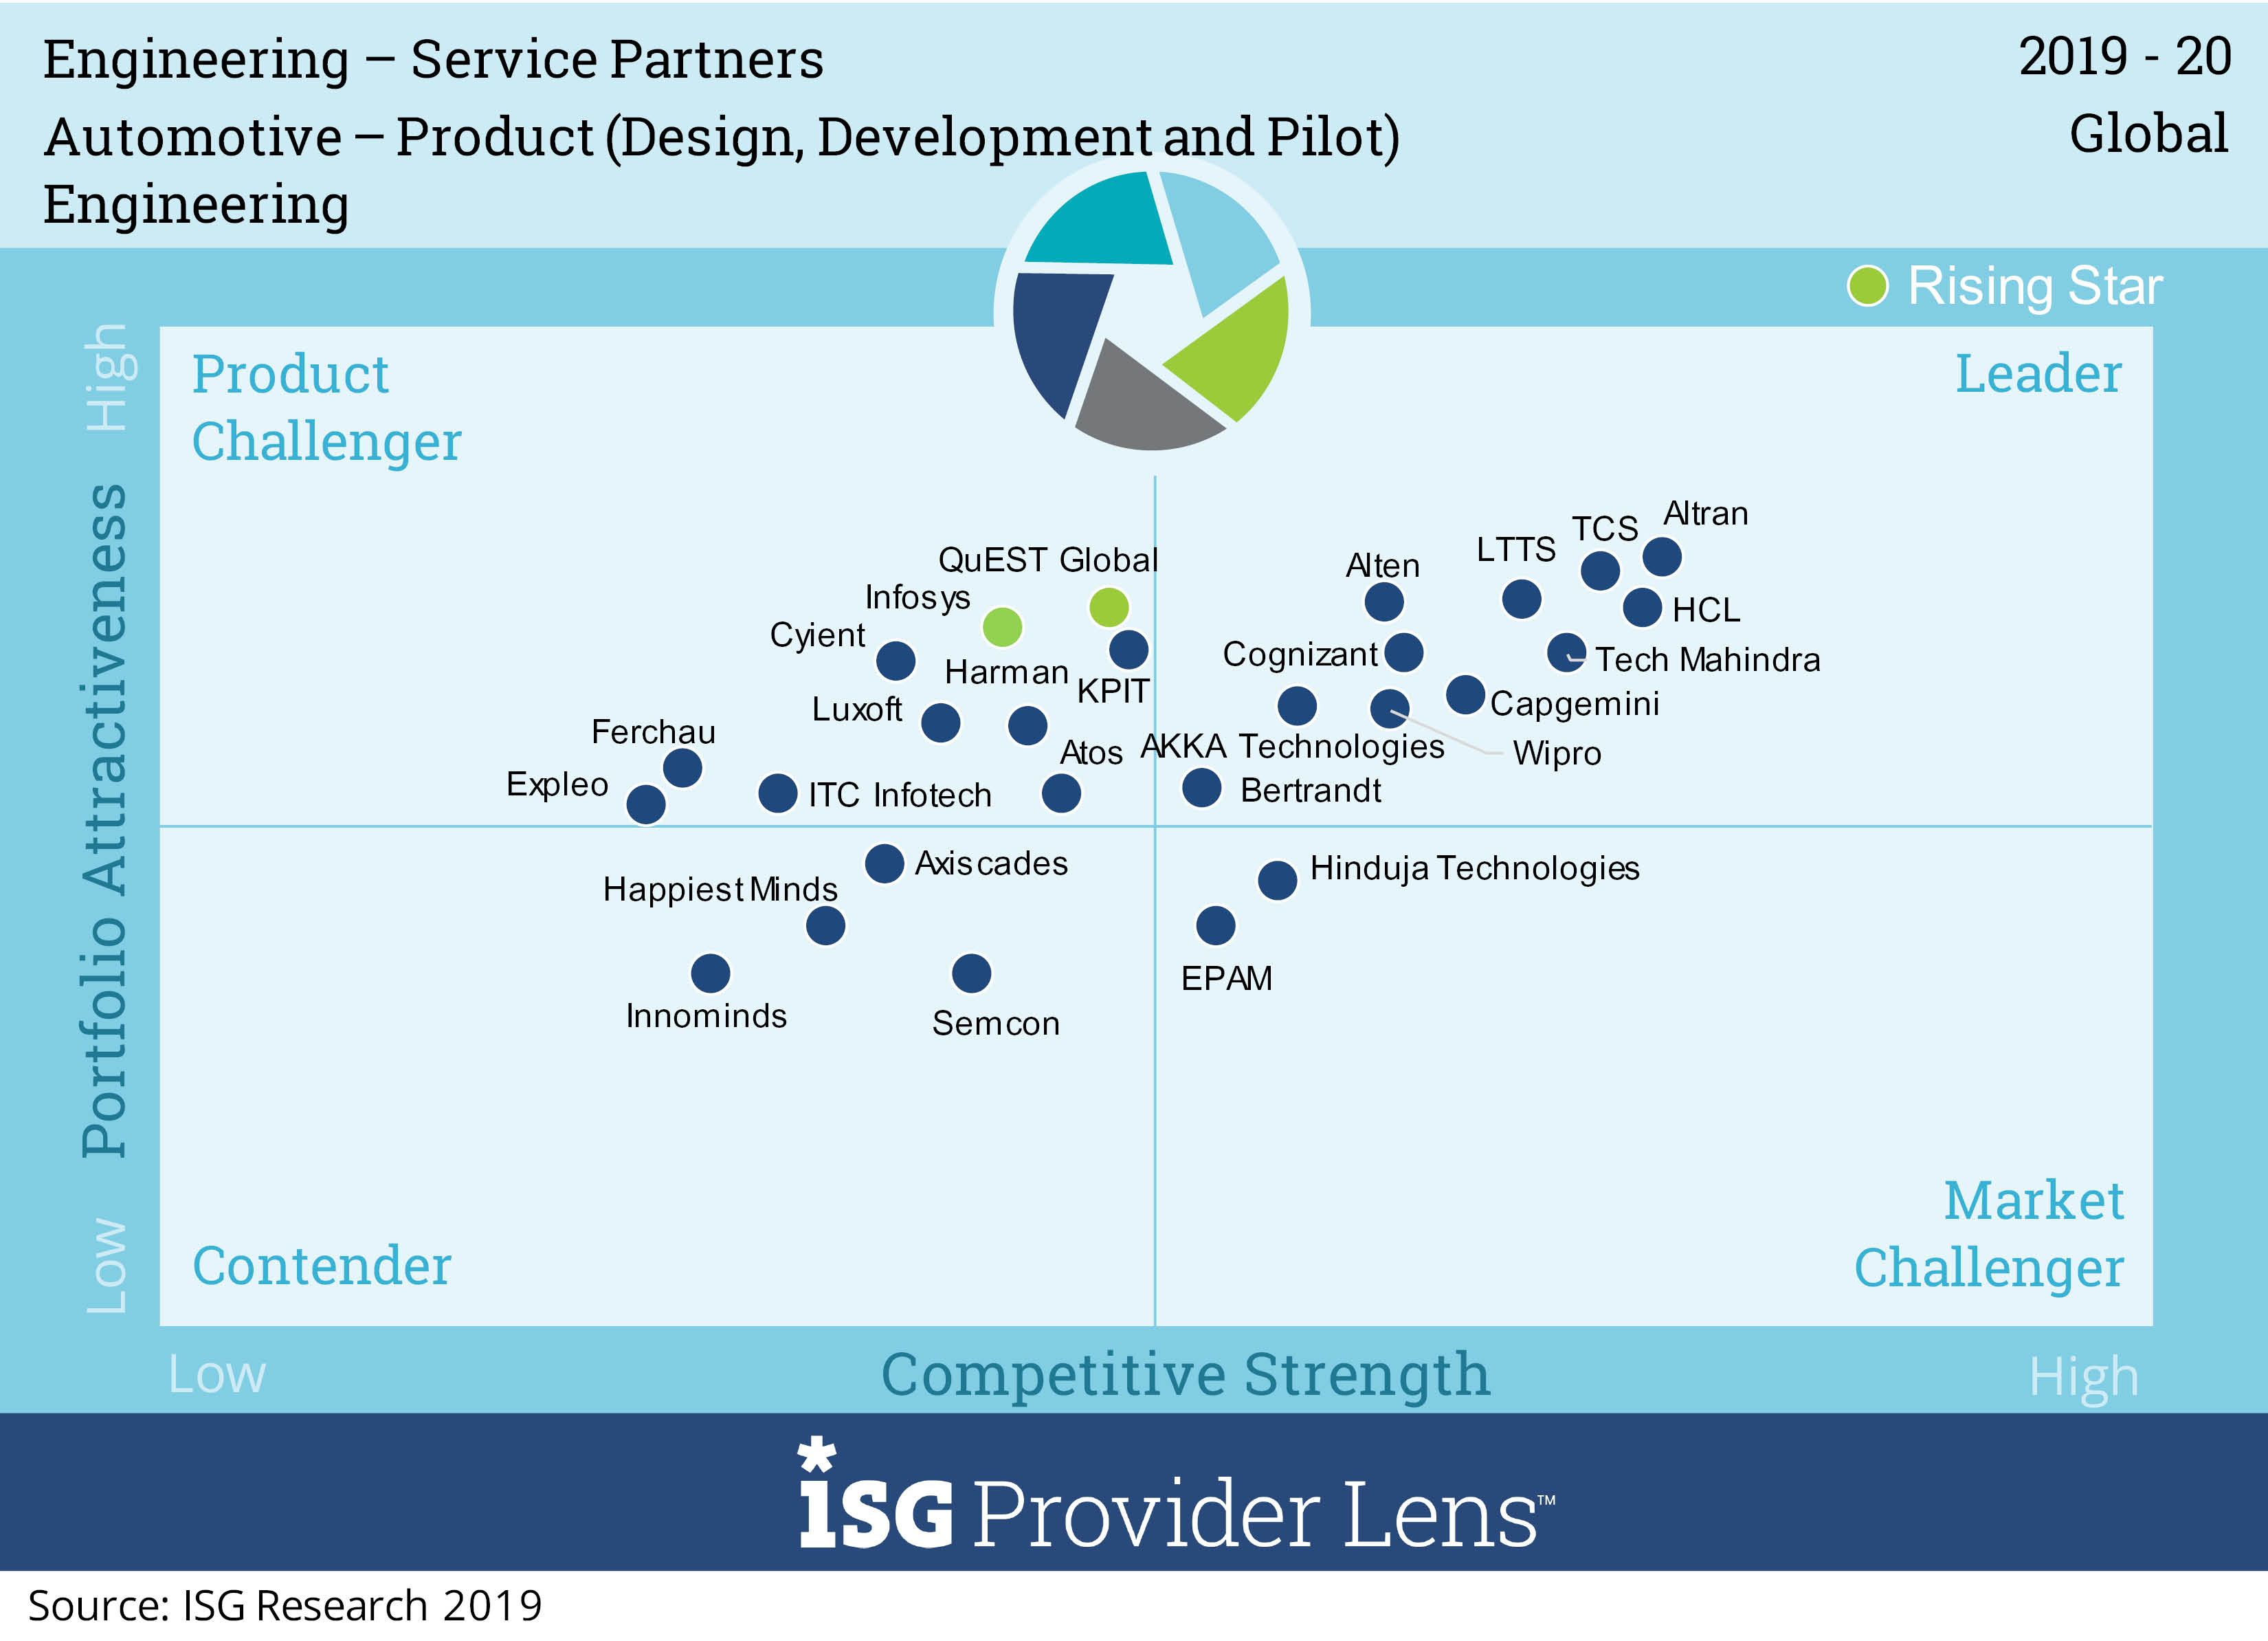 ISG Provider Lens™ : Automotive – Product Engineering, Global